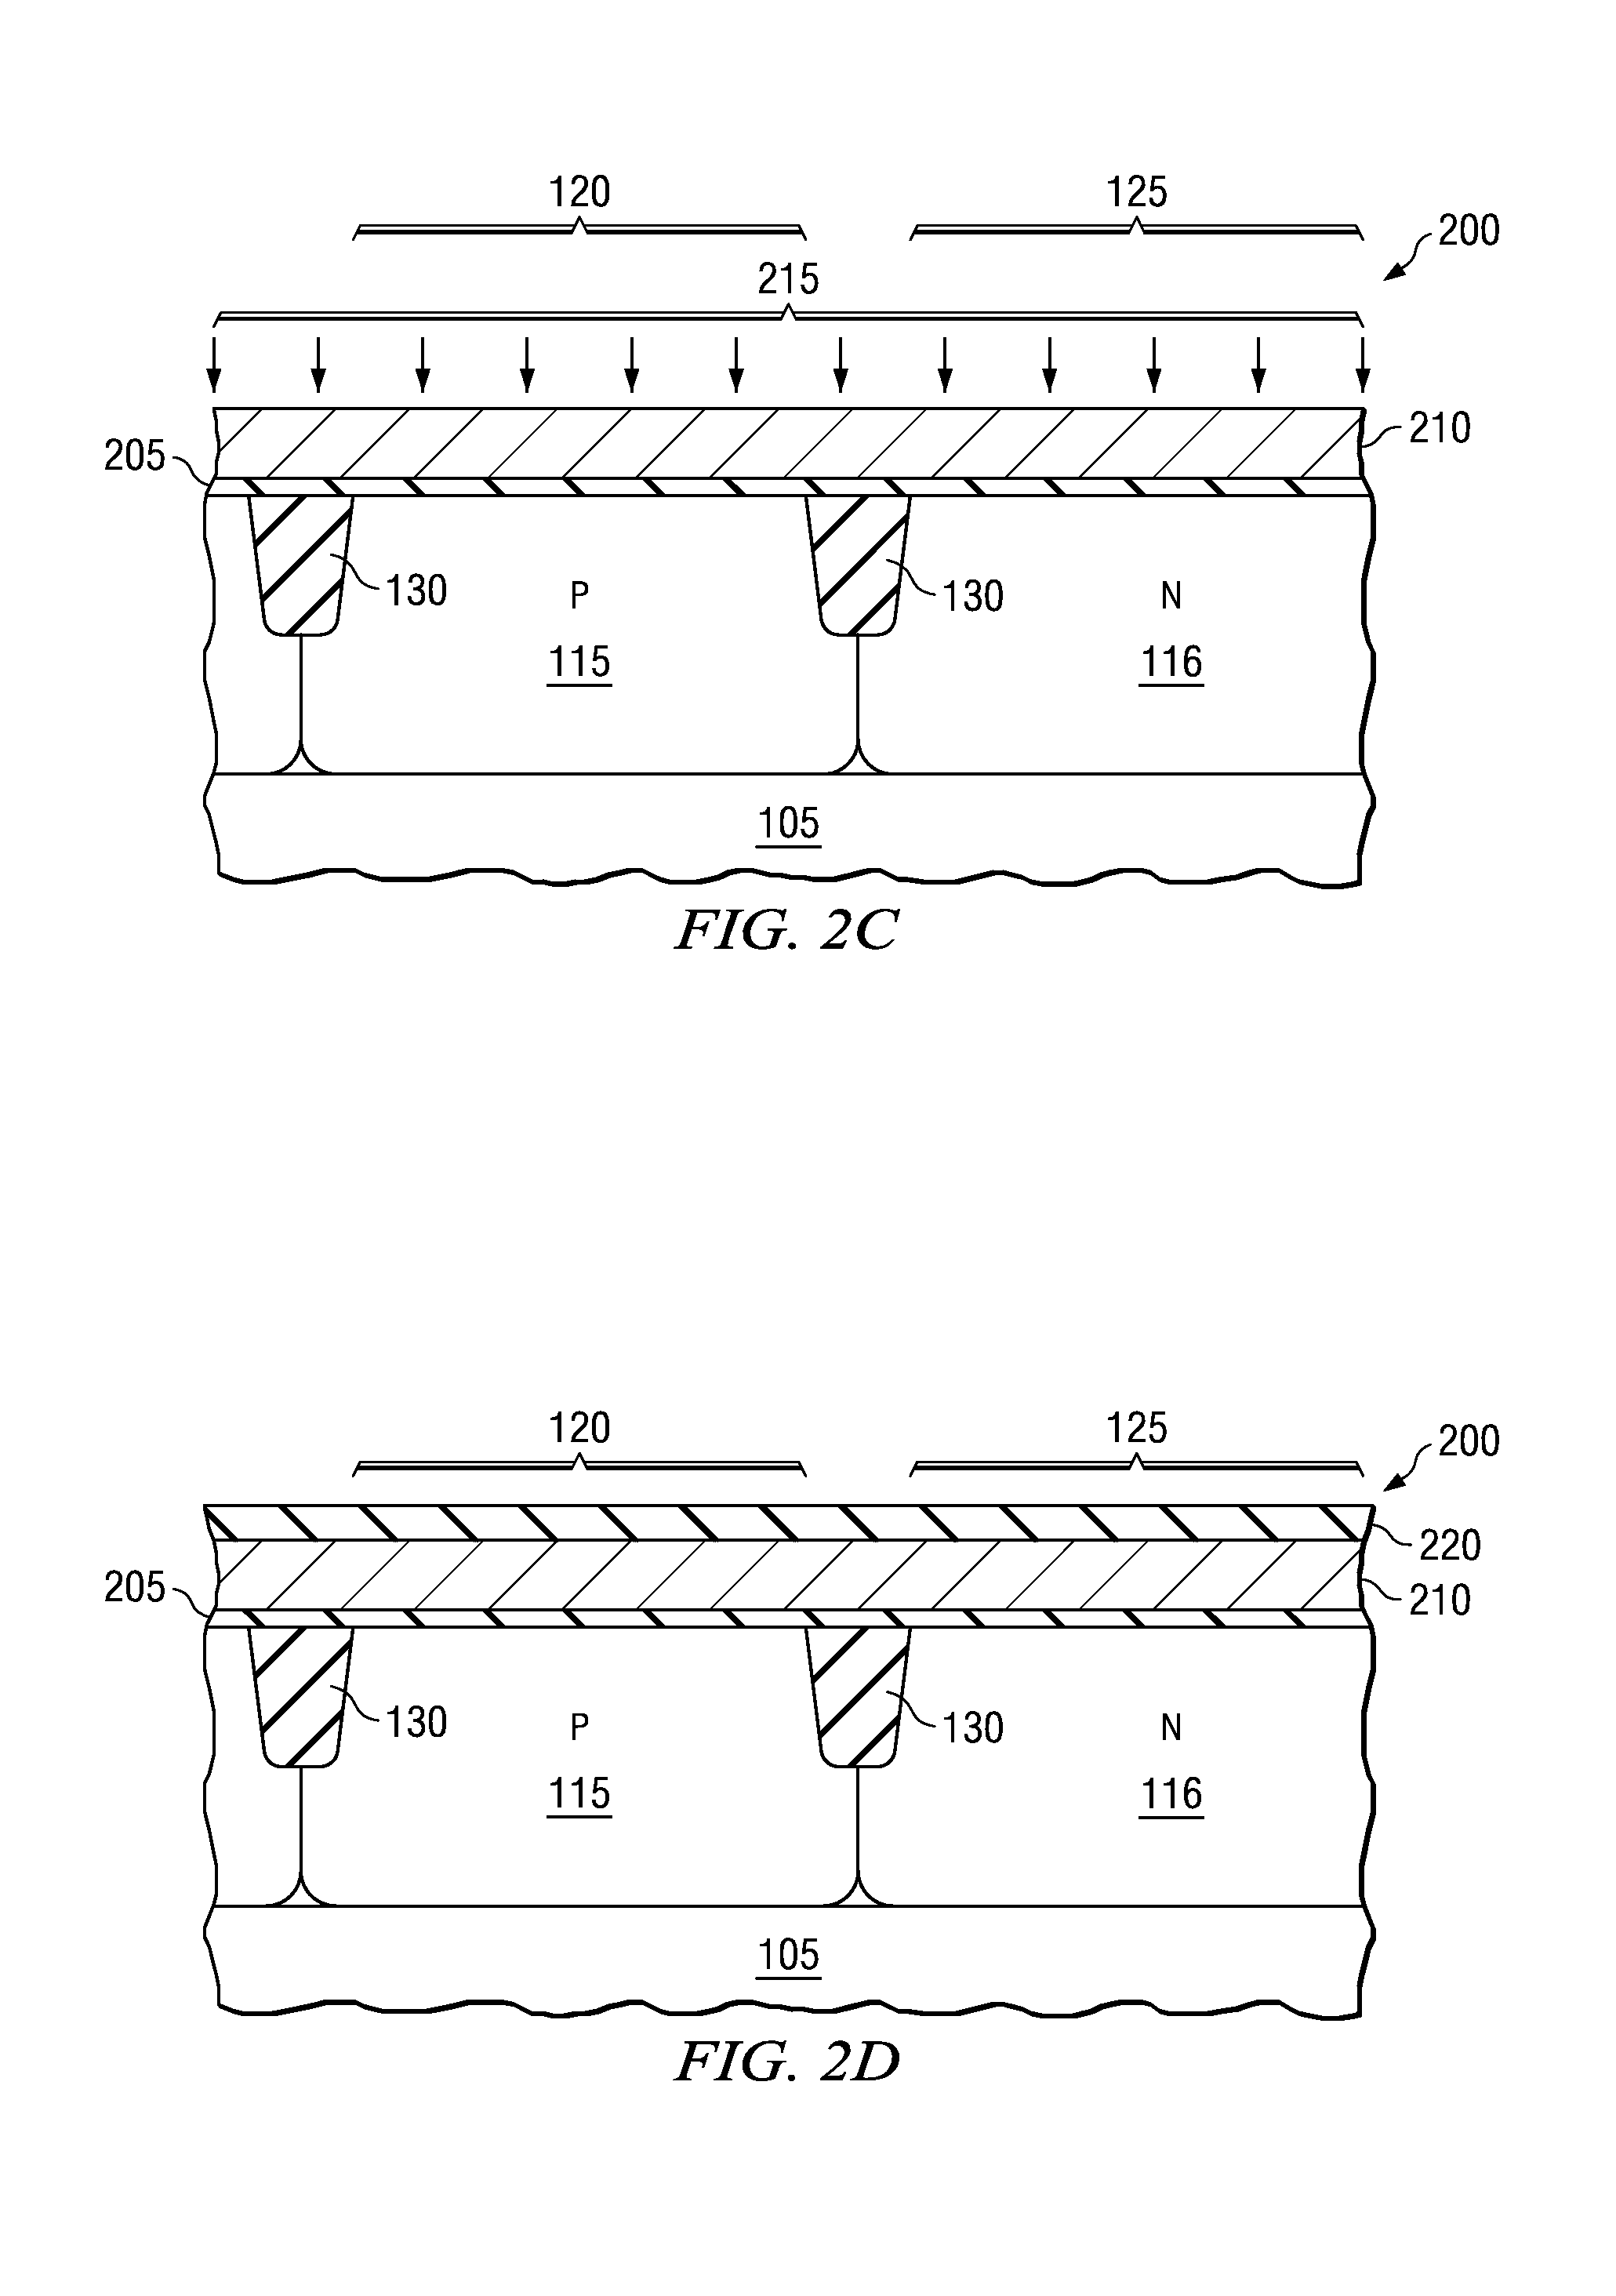 Semiconductor device fabricated using a metal microstructure control process